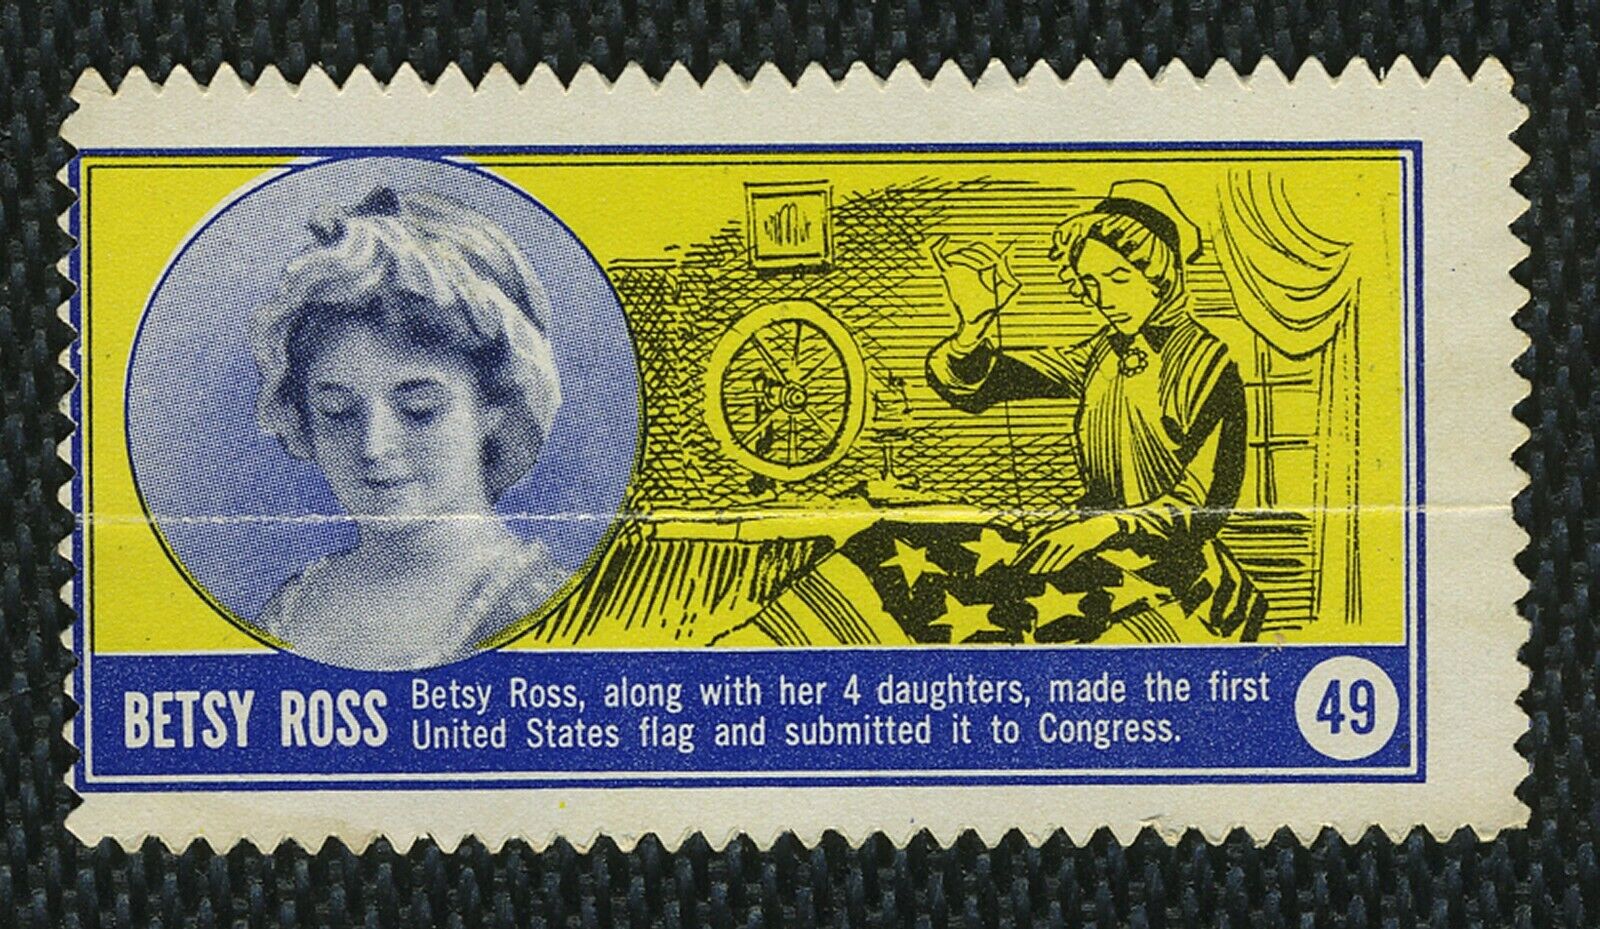 1962 Topps Famous Americans Stamps - #49 Betsy Ross - Made 1st US Flag